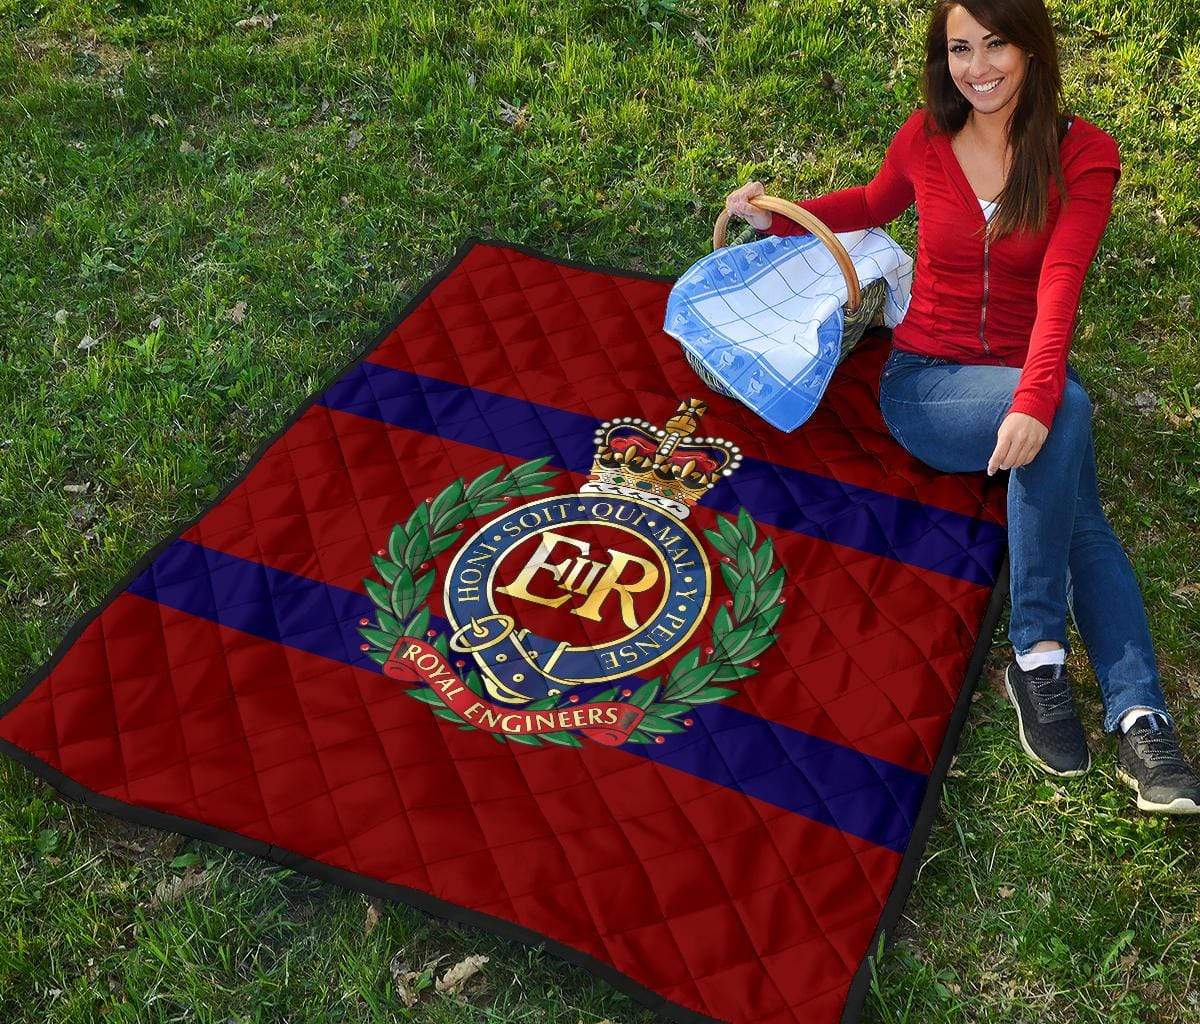 quilt Lap Blanket (45 x 50 inches / 114 x 127 cm) Royal Engineers Quilted Blanket